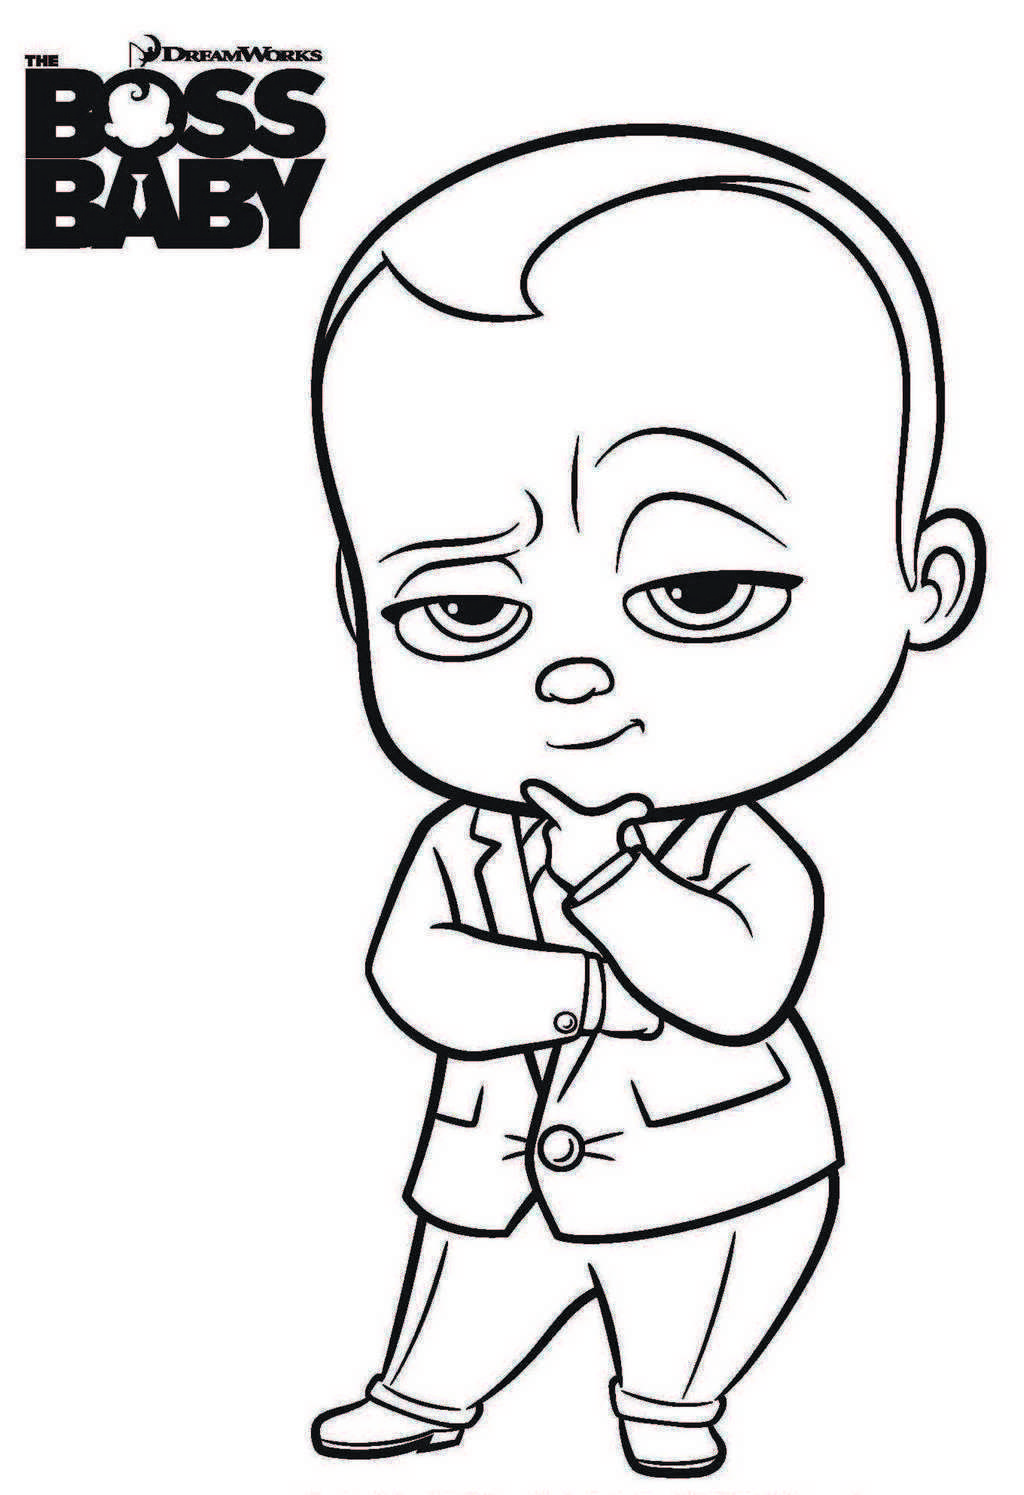 The Boss Baby Coloring Pictures Baby Coloring Pages Baby Drawing Cartoon Coloring Pag